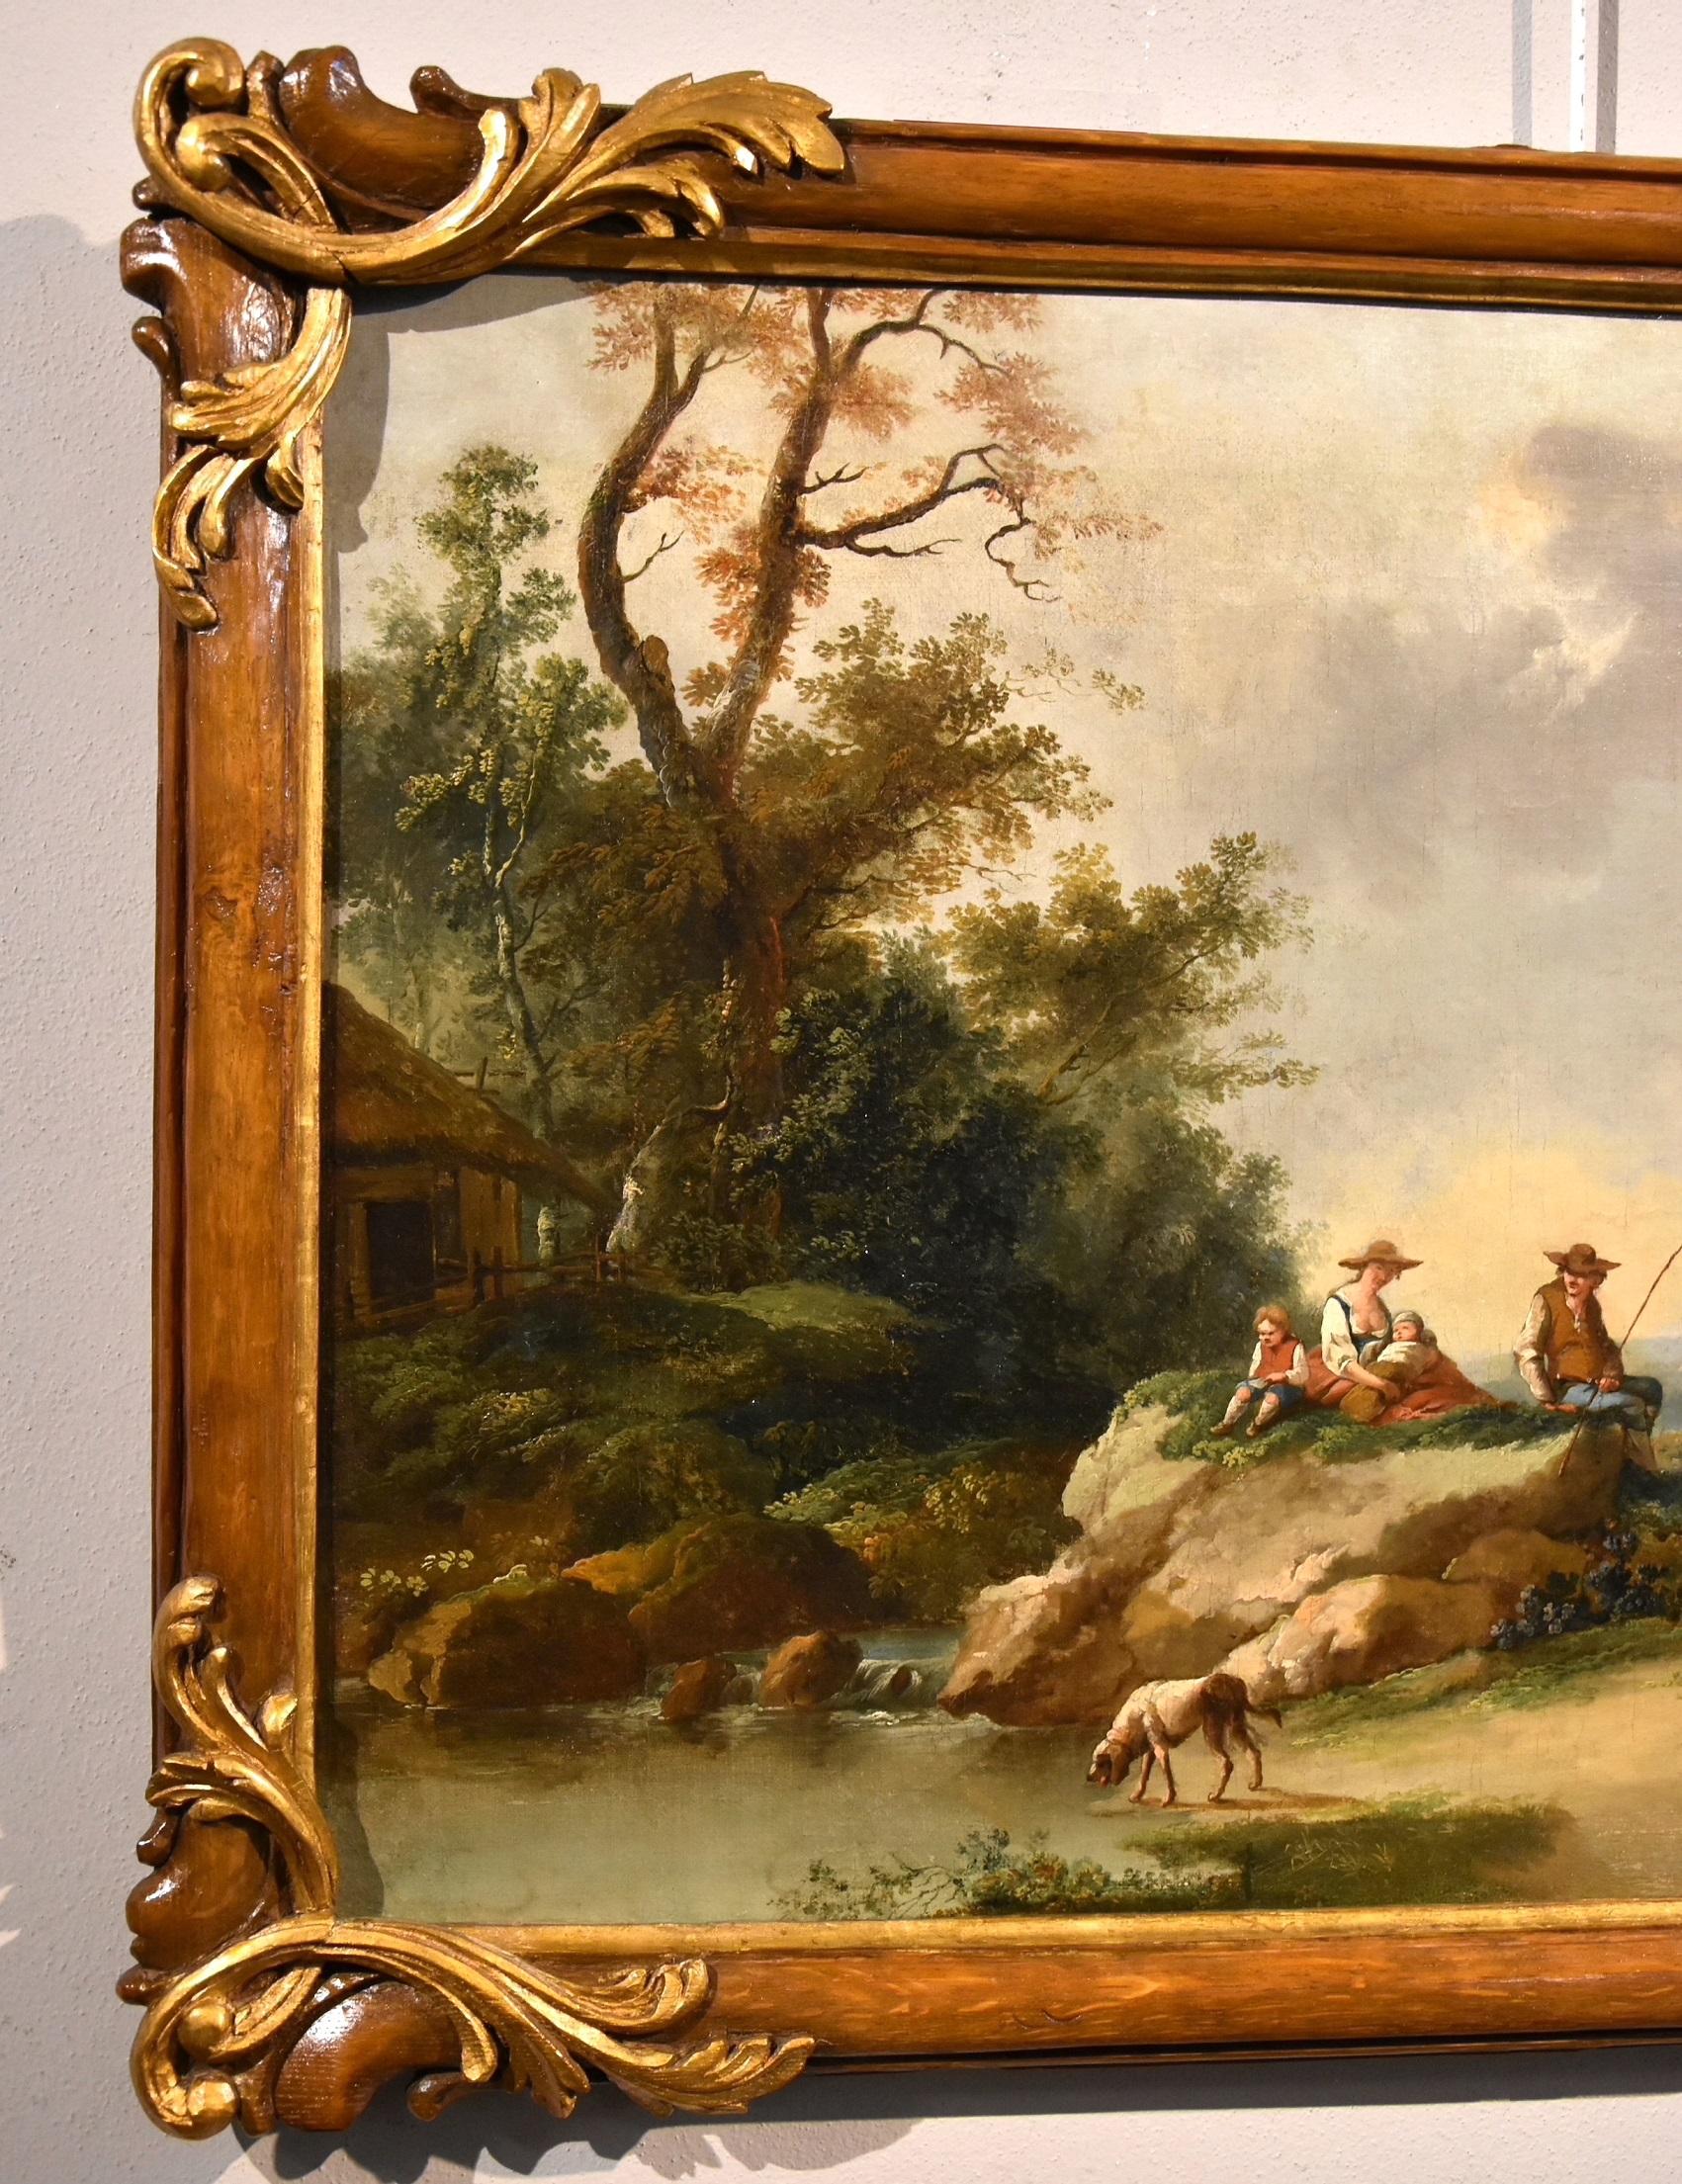 Landscape Zuccarelli Paint Oil on canvas Old master 18th Century Italian View - Old Masters Painting by Francesco Zuccarelli (Pitigliano 1702 - Florence 1788)